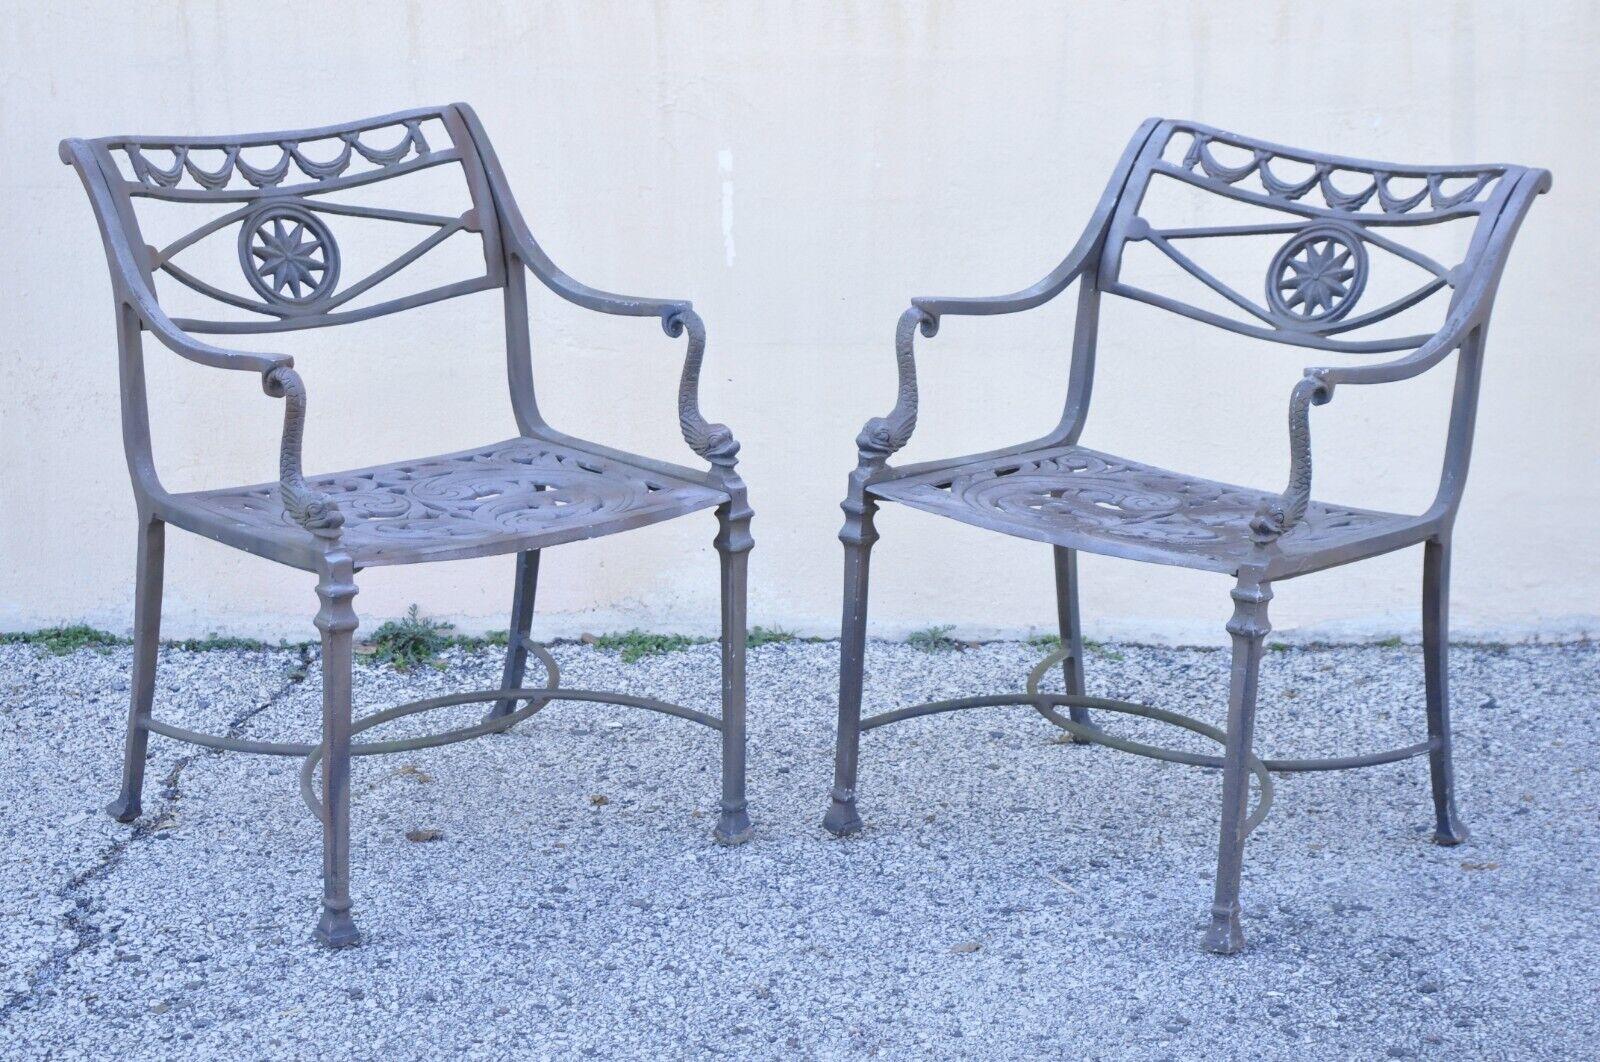 Neoclassical style Molla style Dolphin cast Aluminum Patio settee & chairs 3 Pcs. Item features (2) armchairs, (1) loveseat/settee, dolphin accents, ornate seat, tapered legs, great style and form, unmarked, maker unconfirmed. Circa late 20th